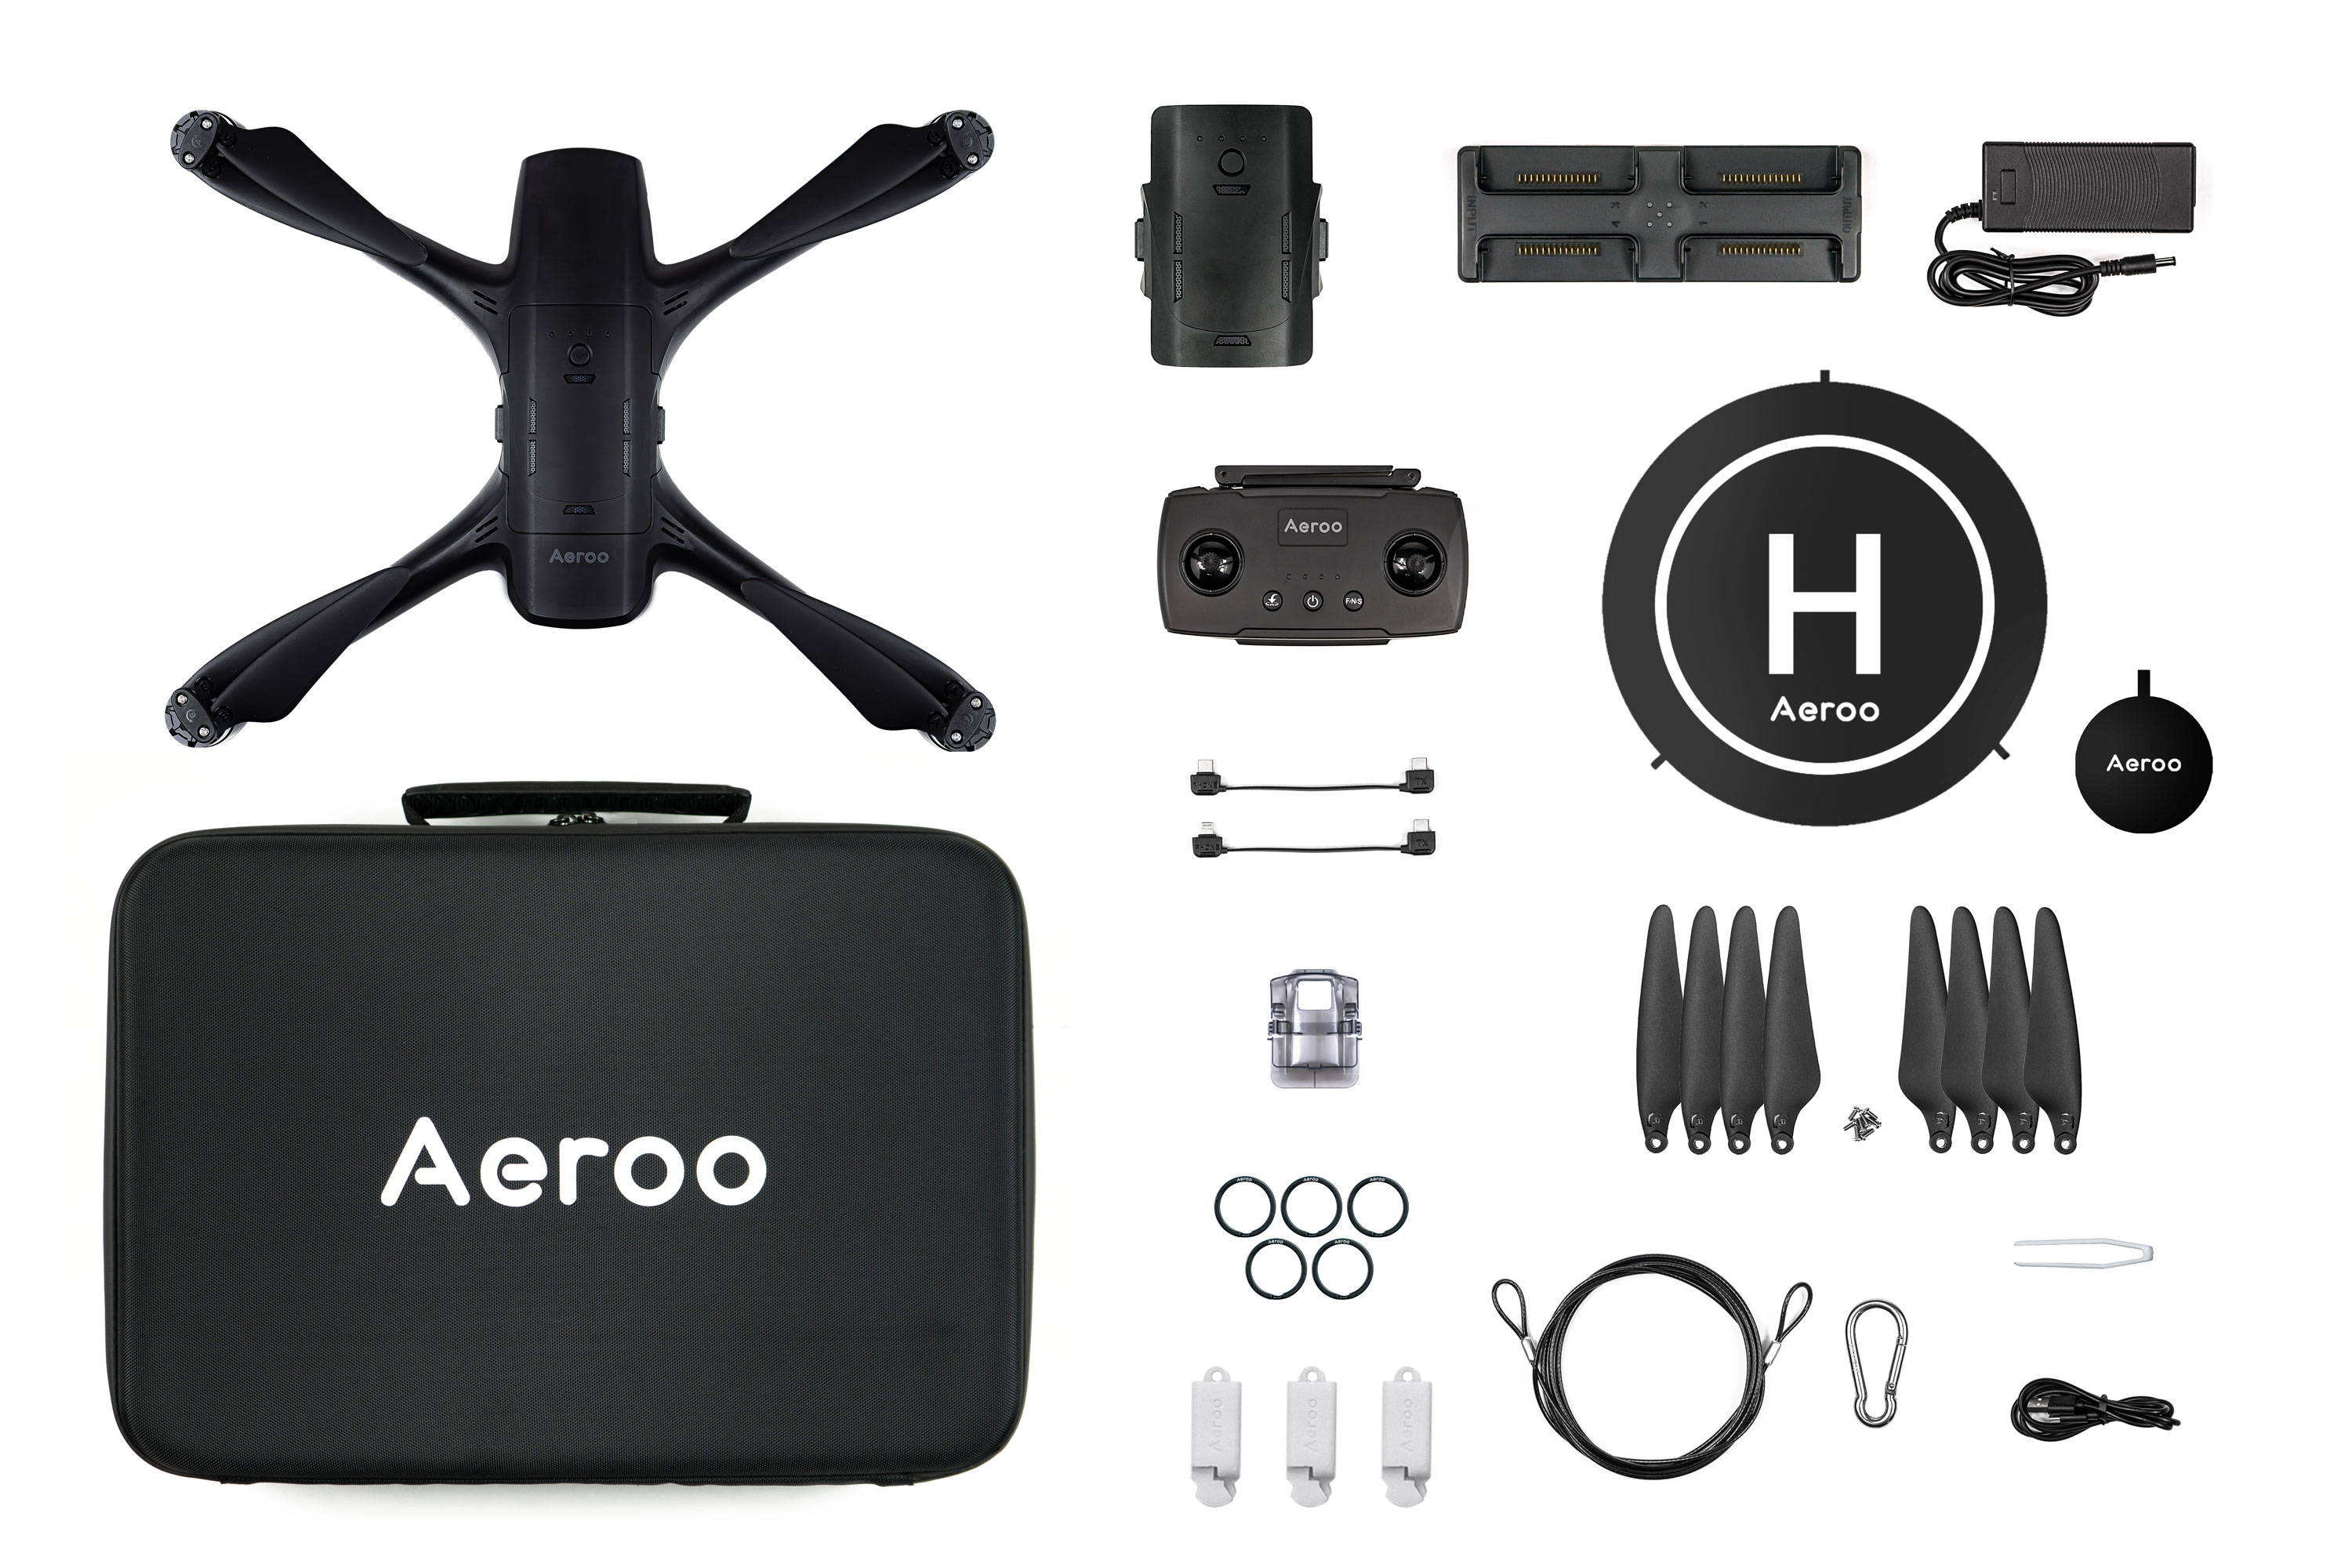 Aeroo Pro combo kit that includes a drone with essential accessories and more.